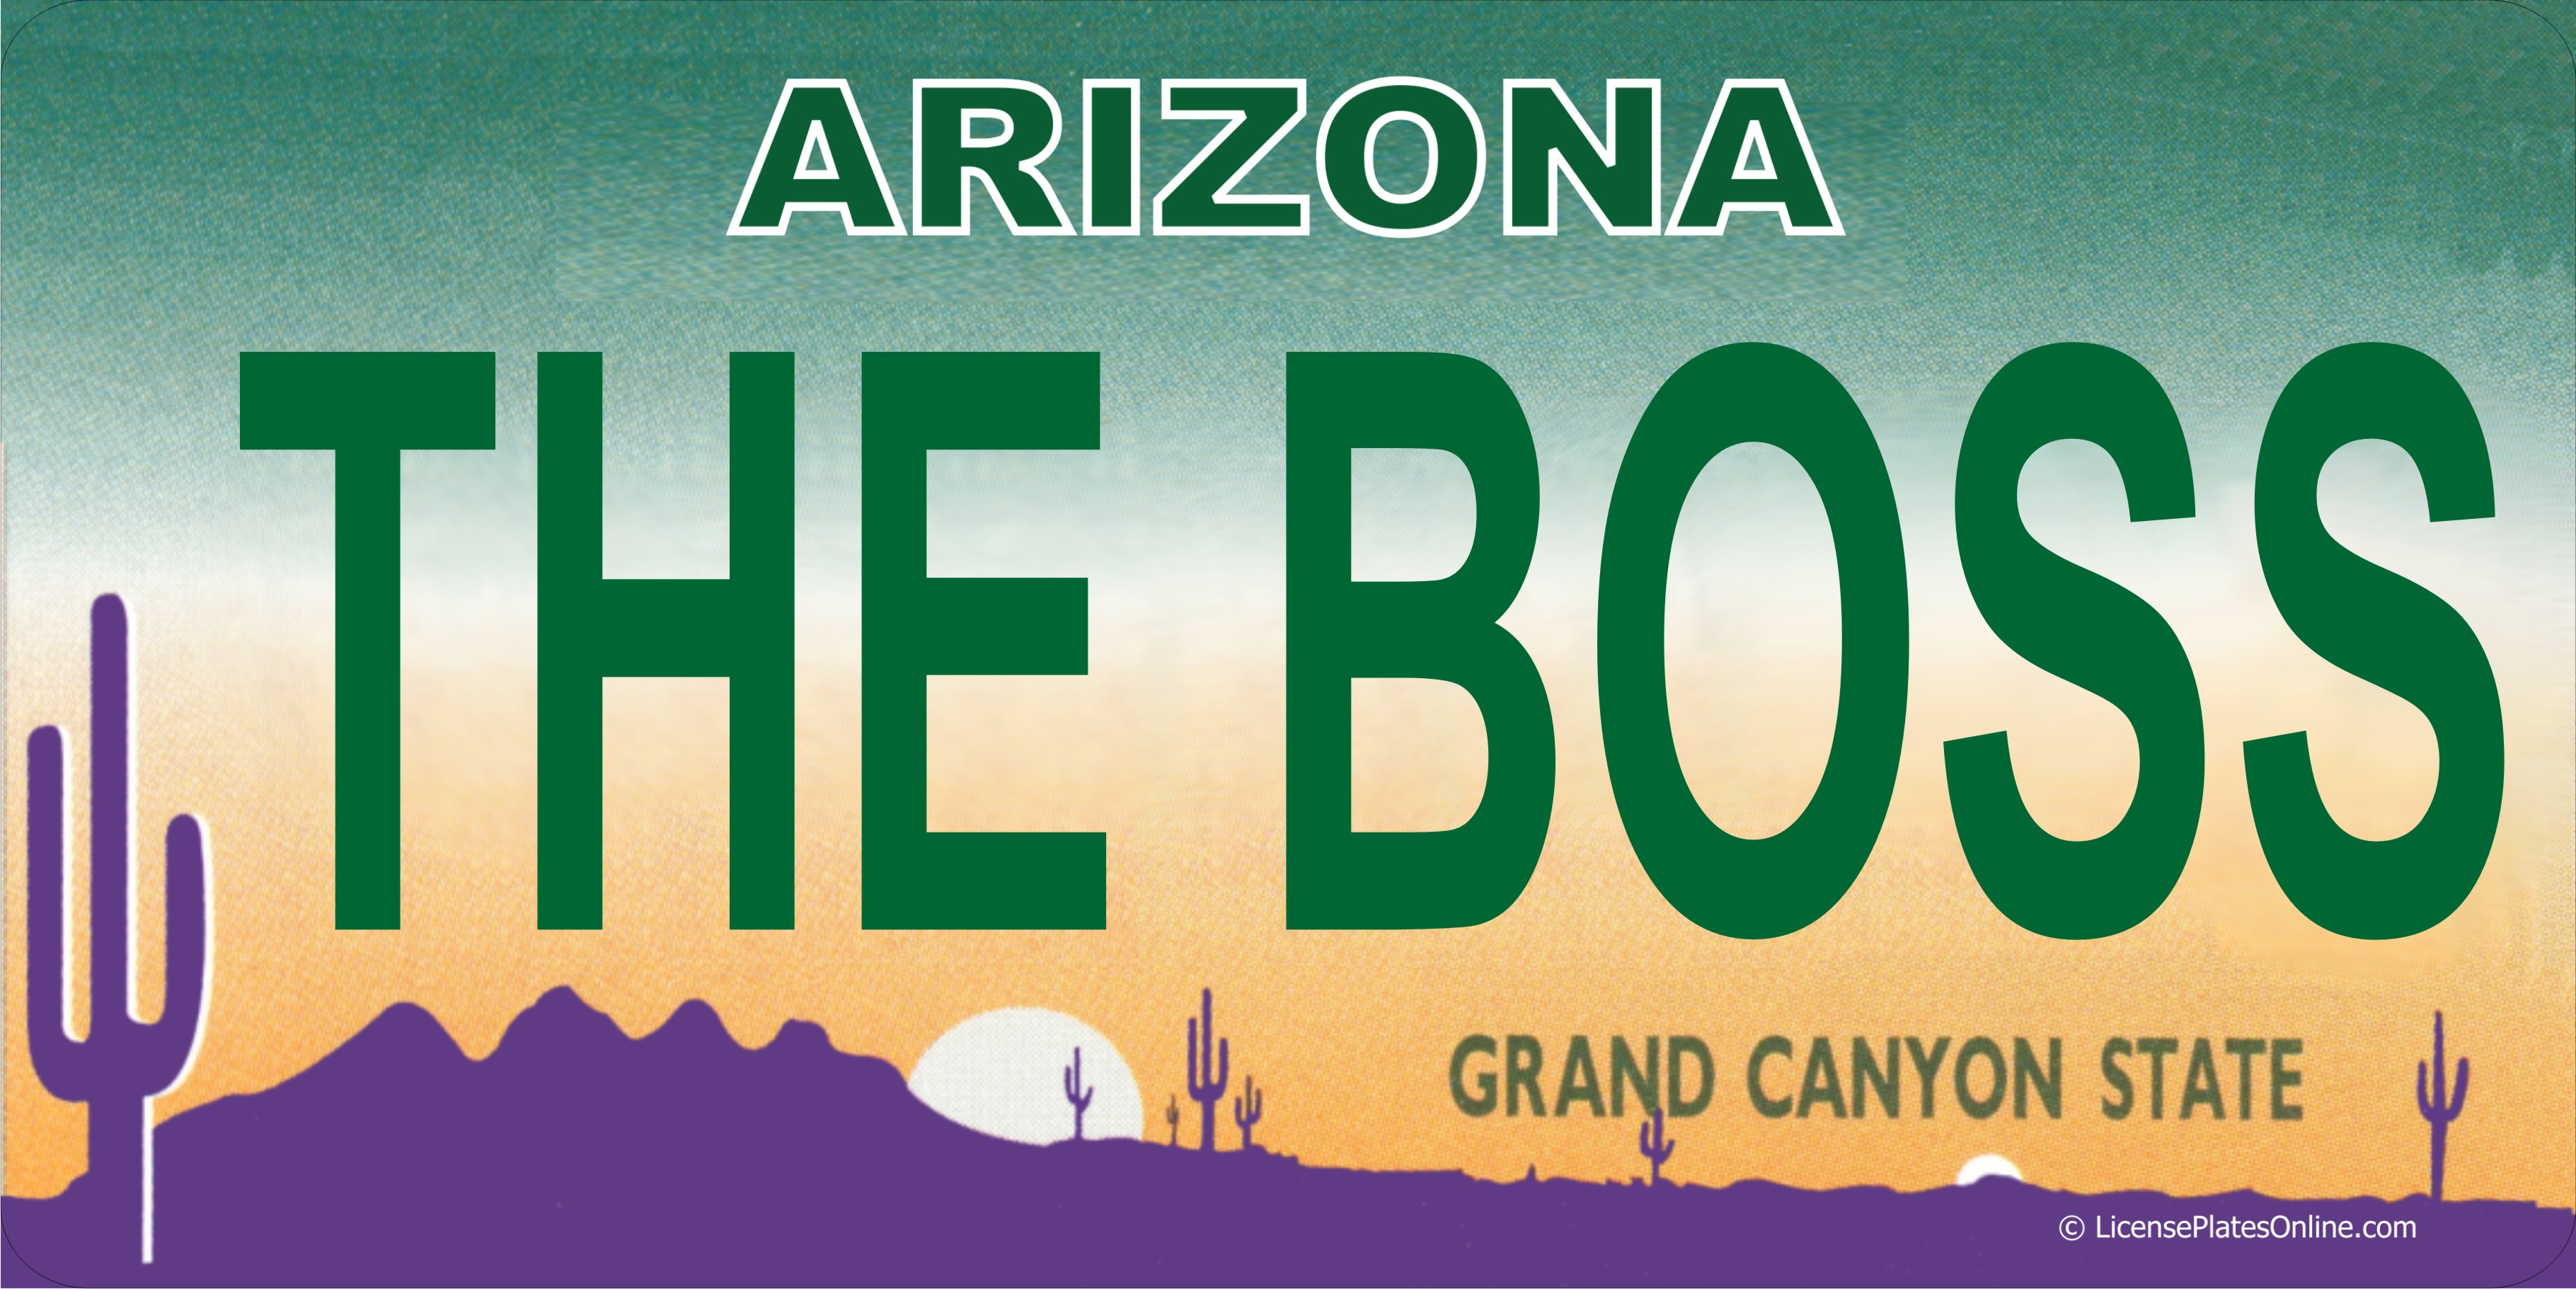 Arizona THE BOSS Photo LICENSE PLATE   Free Personalization on this PLATE